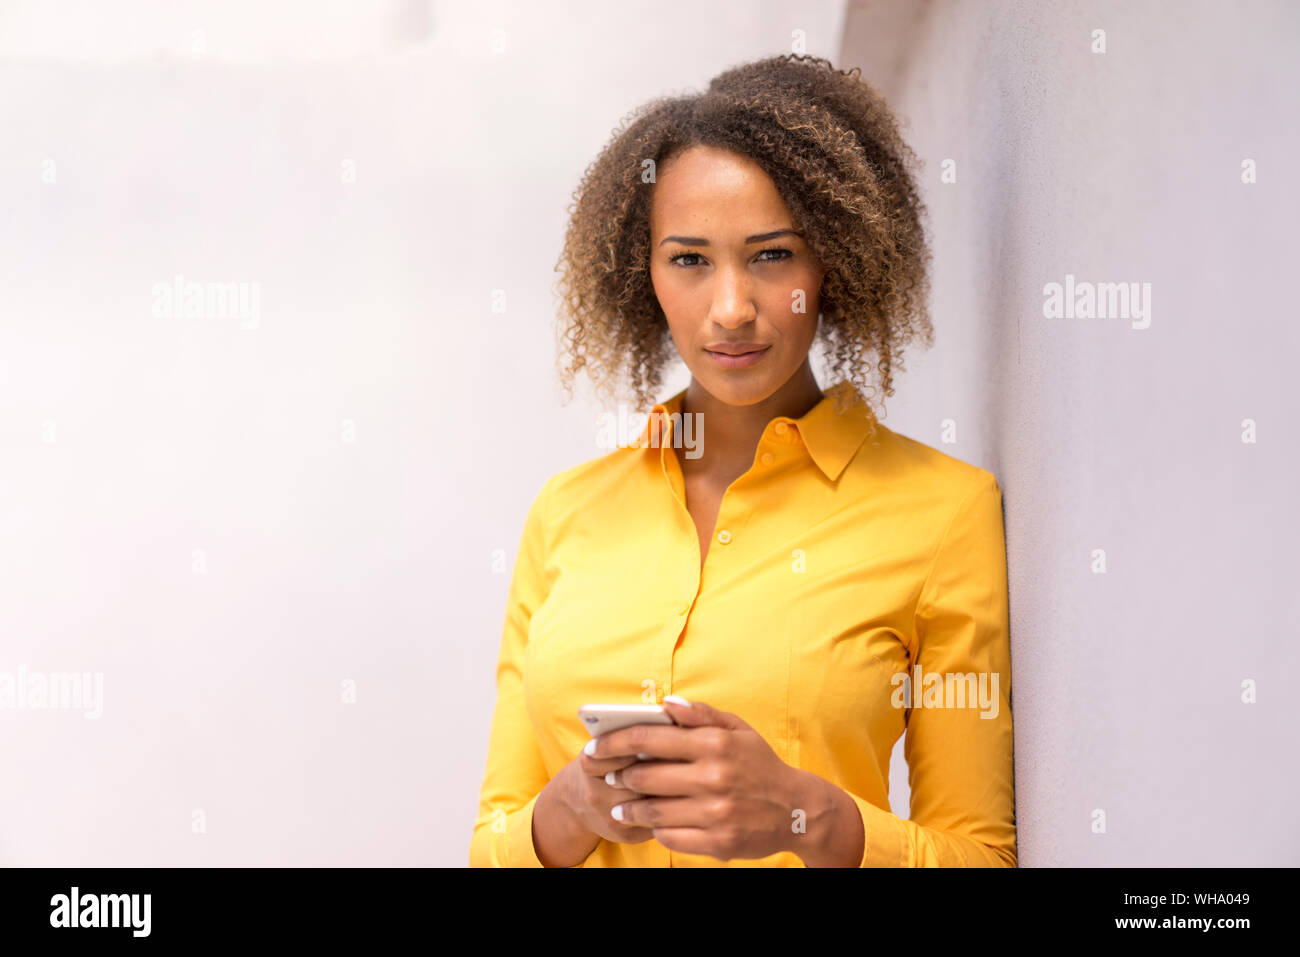 Portrait of young woman with cell phone wearing yellow shirt Stock Photo